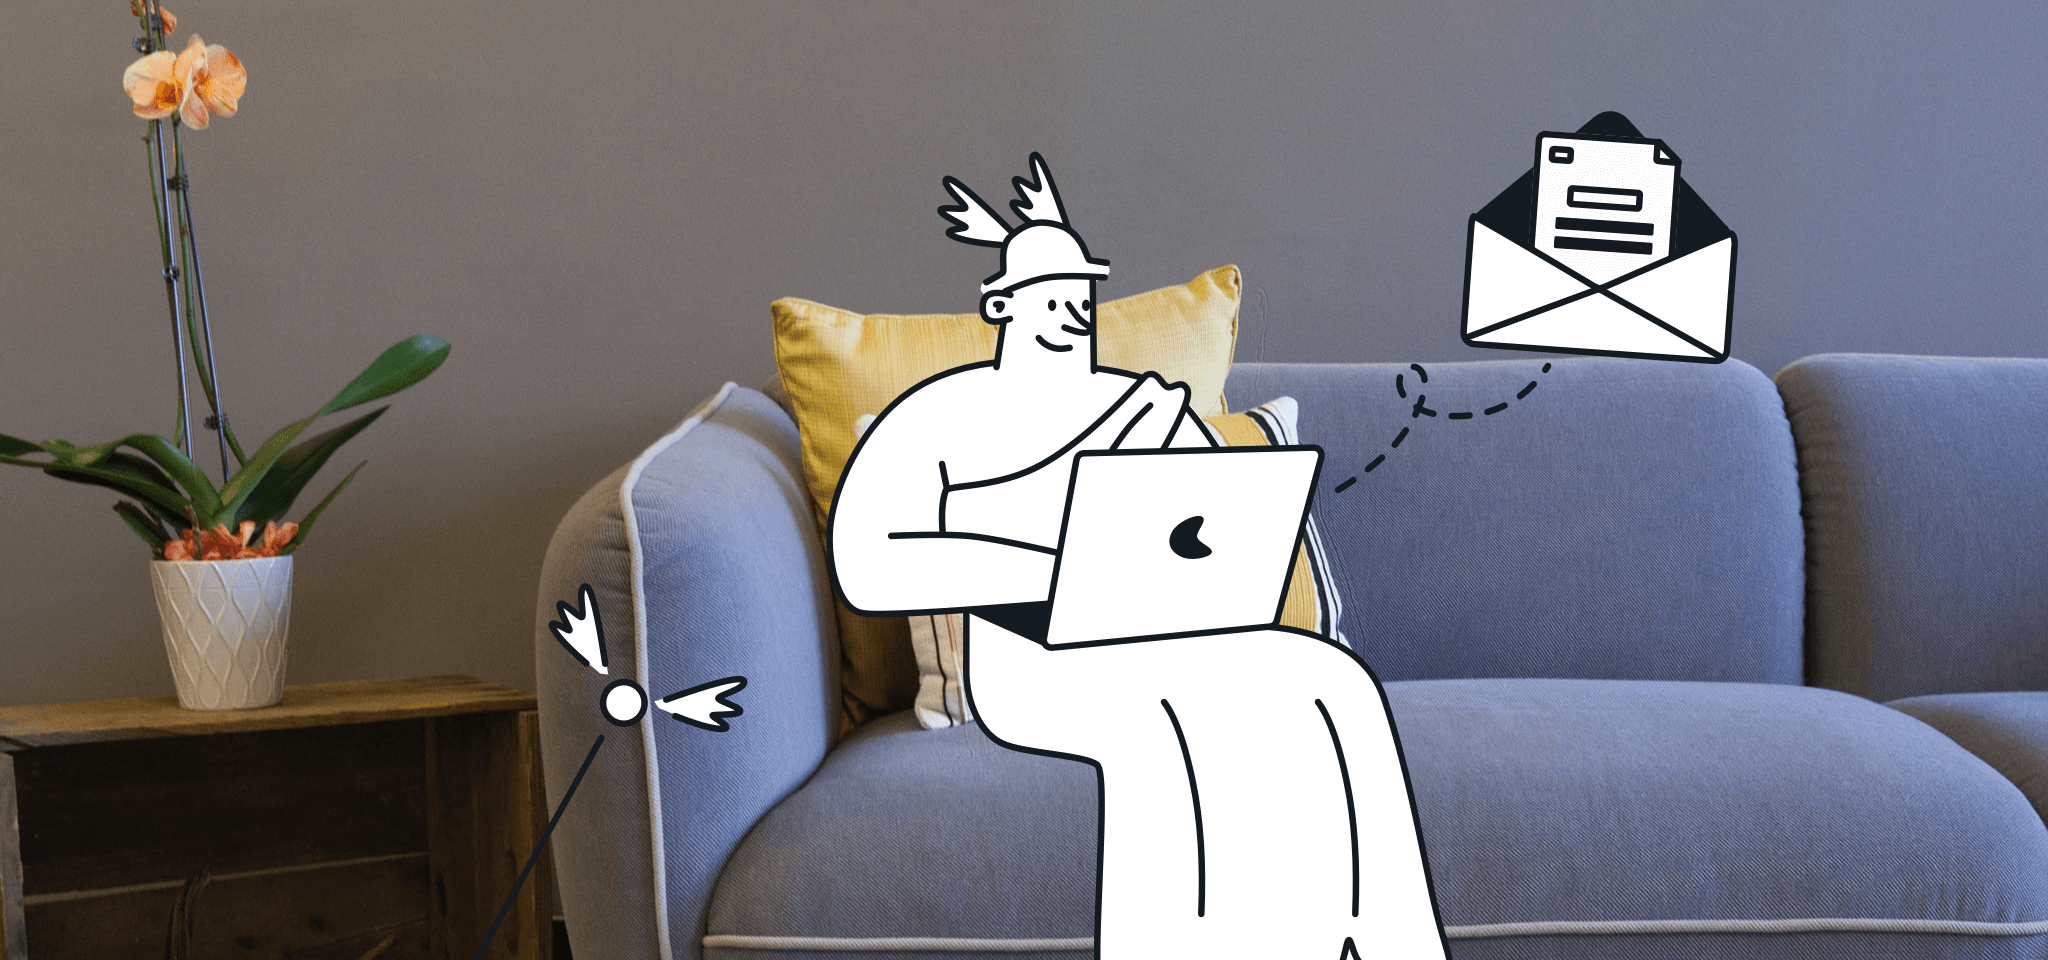 Hermes sends an email from a laptop on a sofa